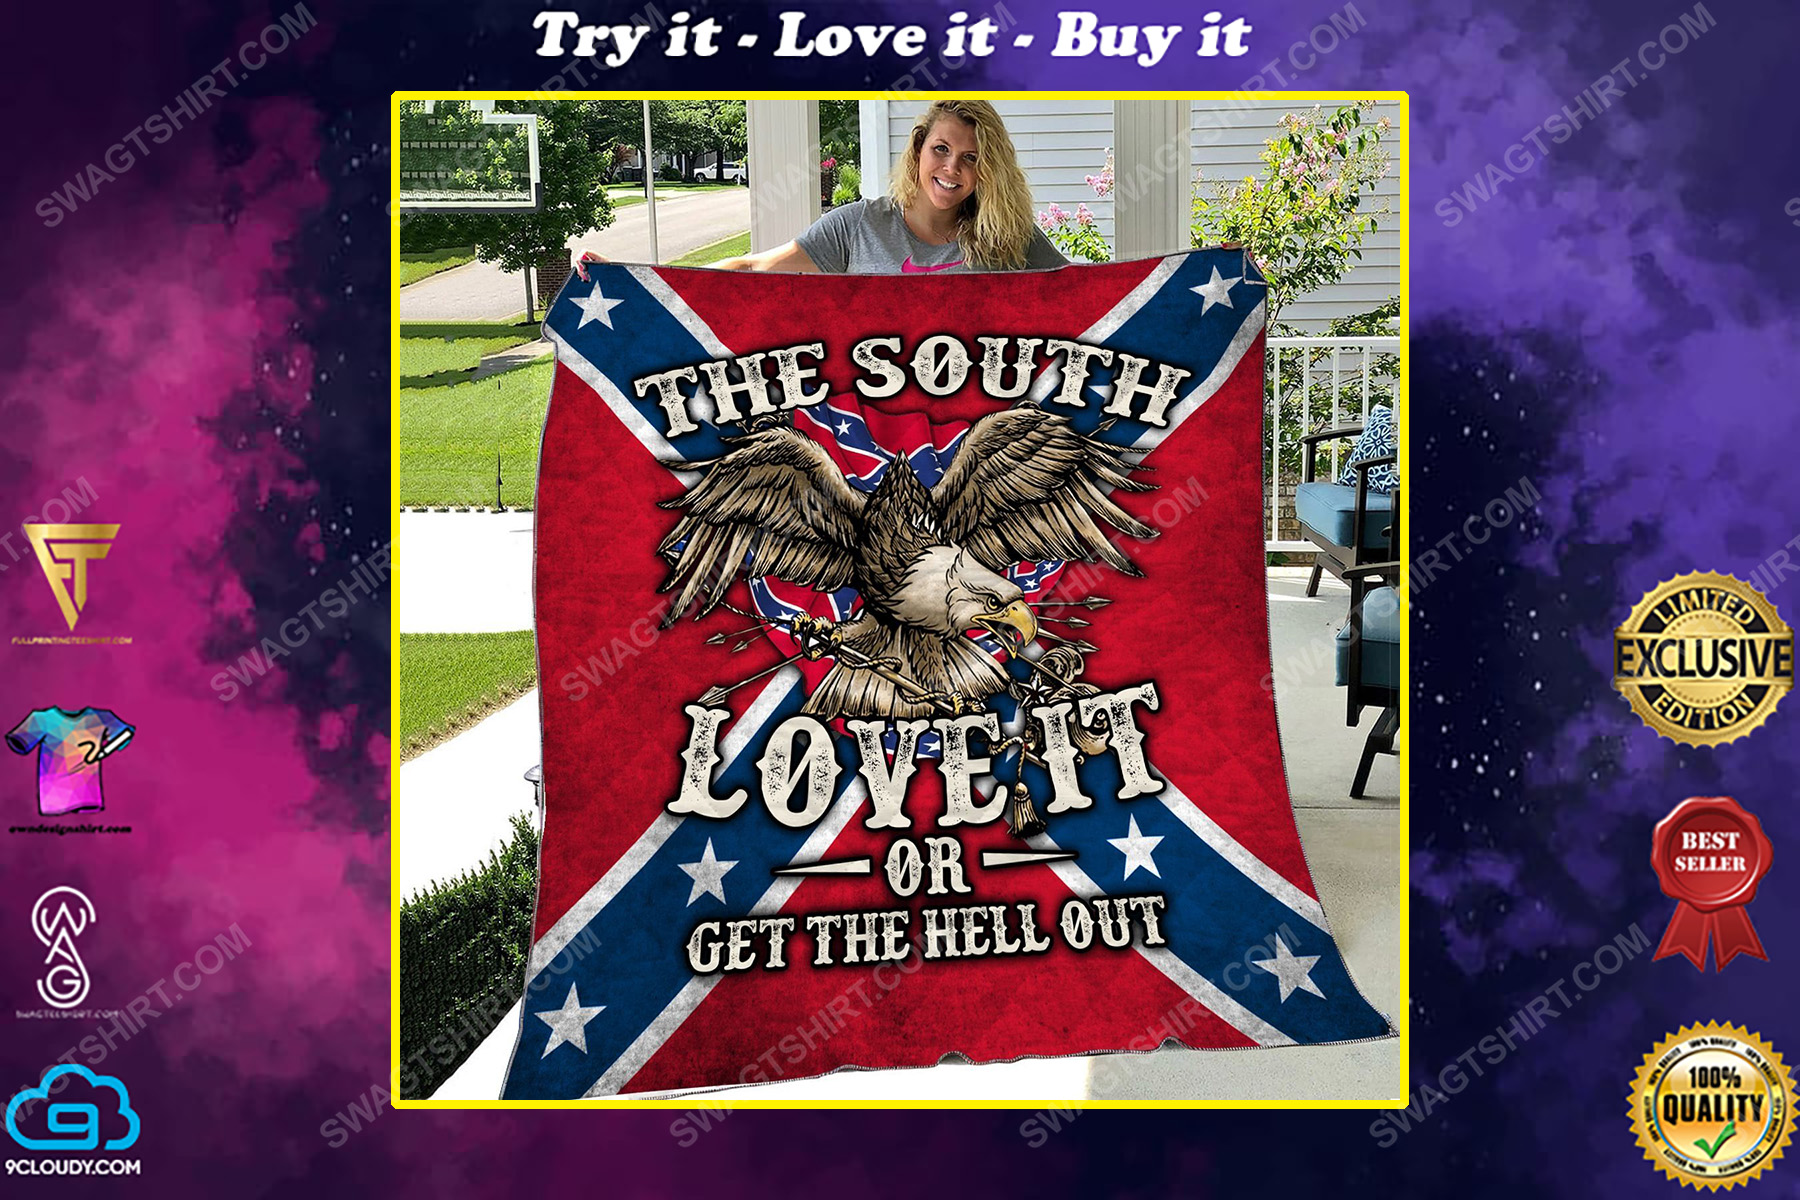 Confederate southern flag eagle the south love it or get the hell out quilt